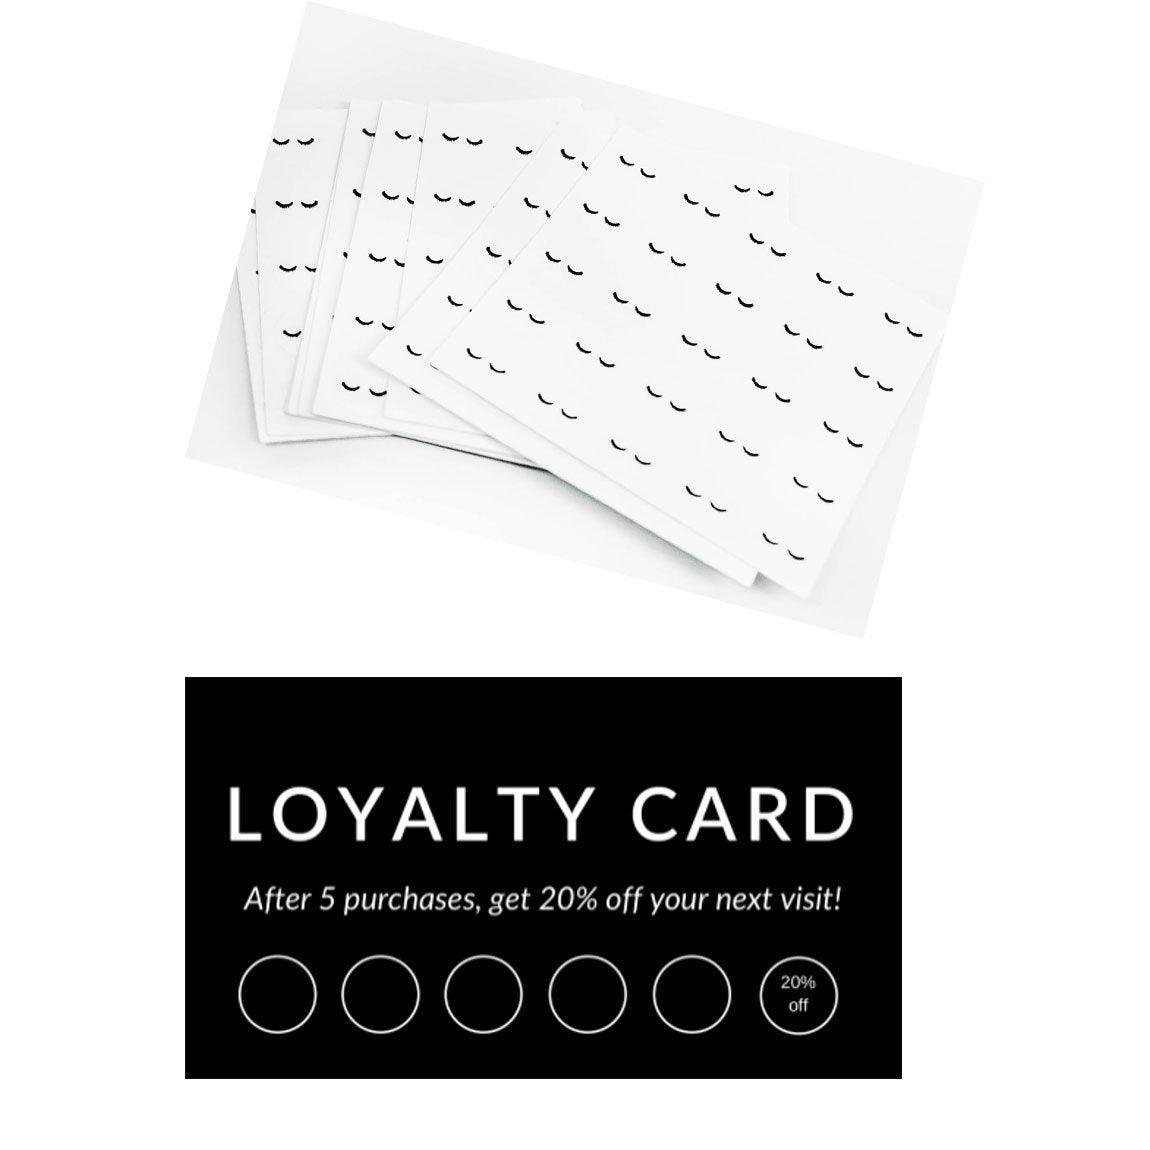 love-loyalty-cards-pack-of-5-or-10-architects-fairies